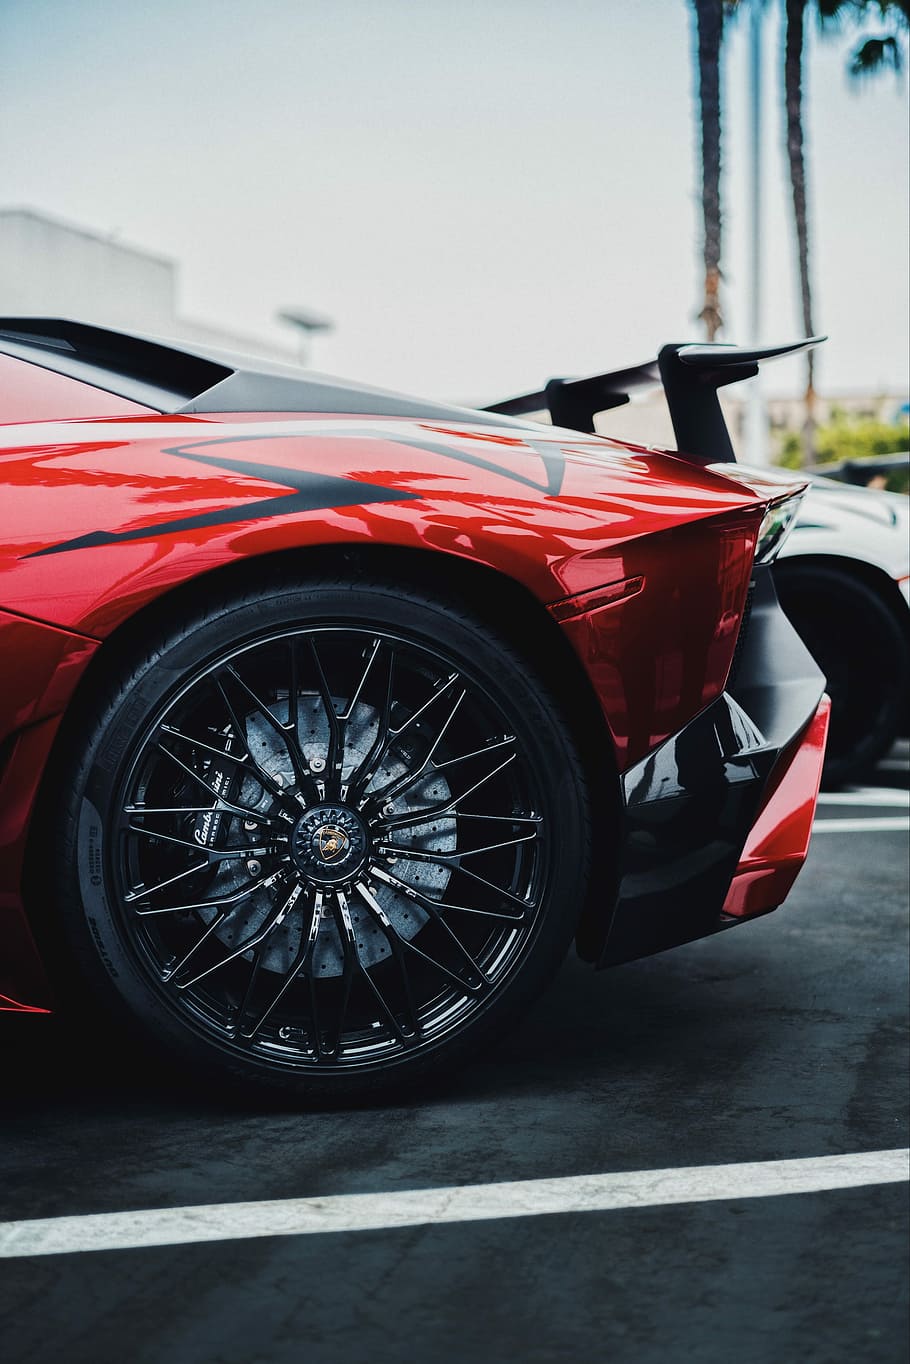 black and red Lamborghini Aventador SV rear left side, red car with spoiler